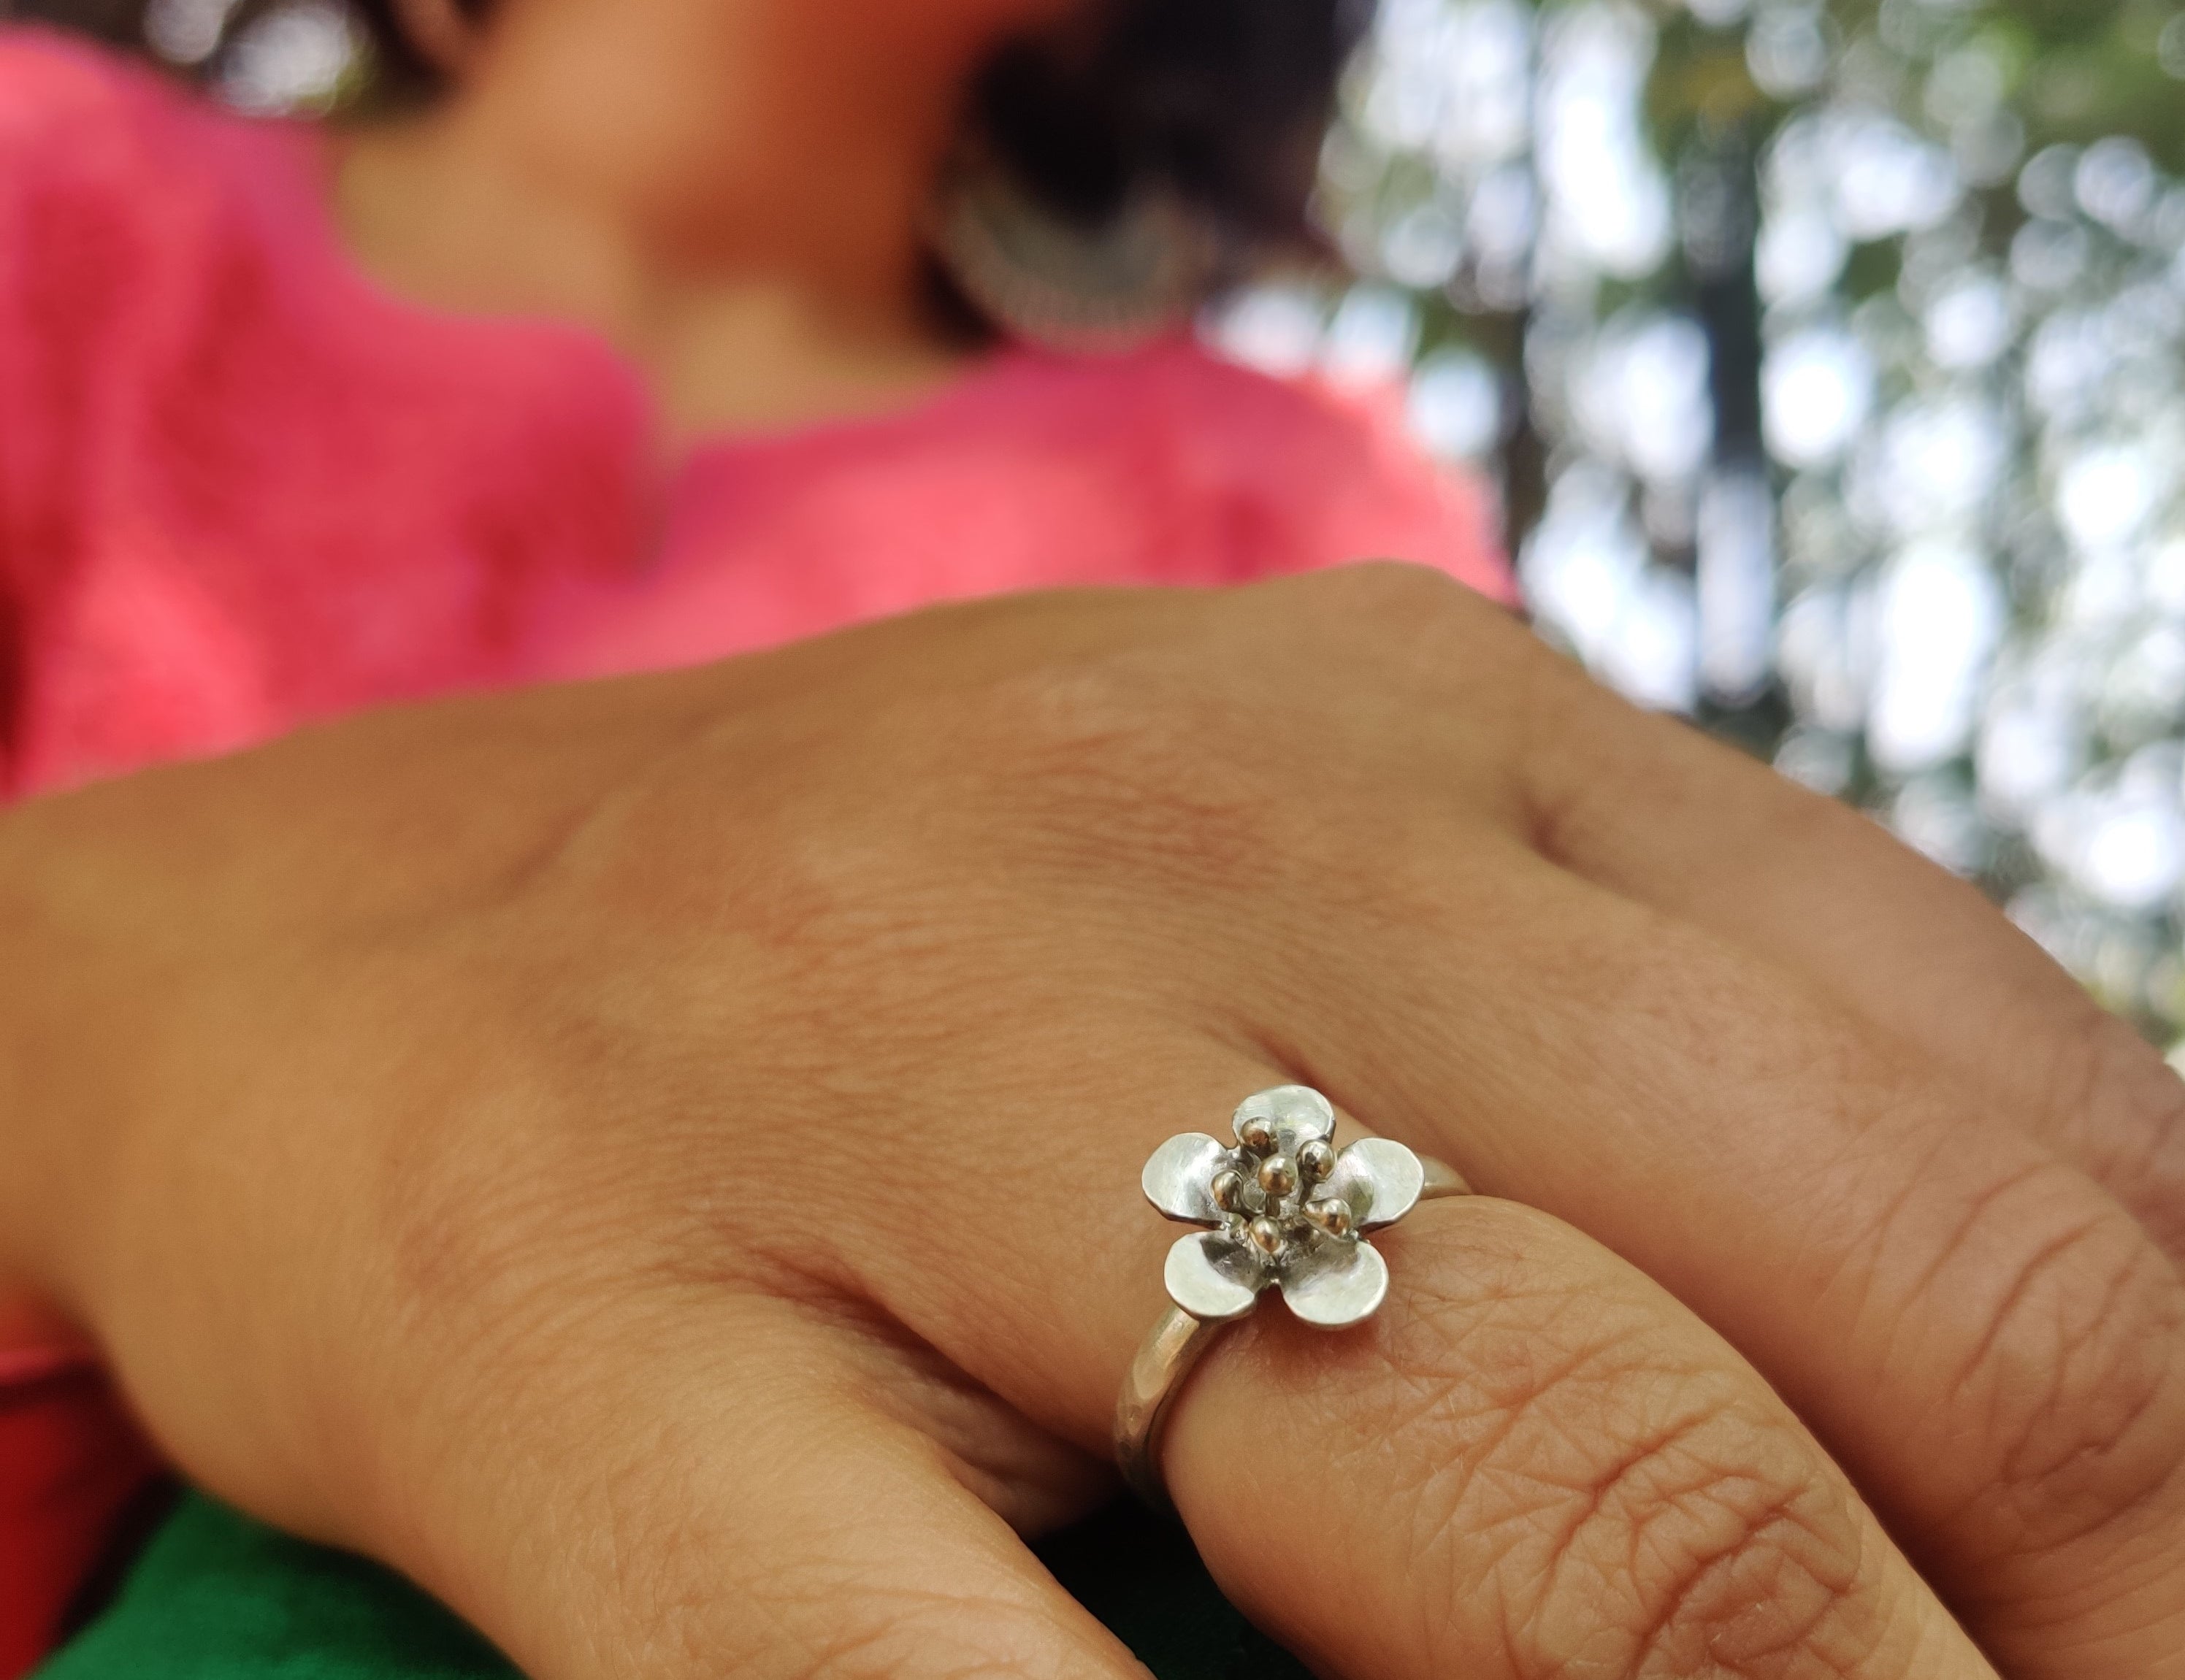 Premium silver ring collection - Buttercup Flower Finger Ring by Quirksmith